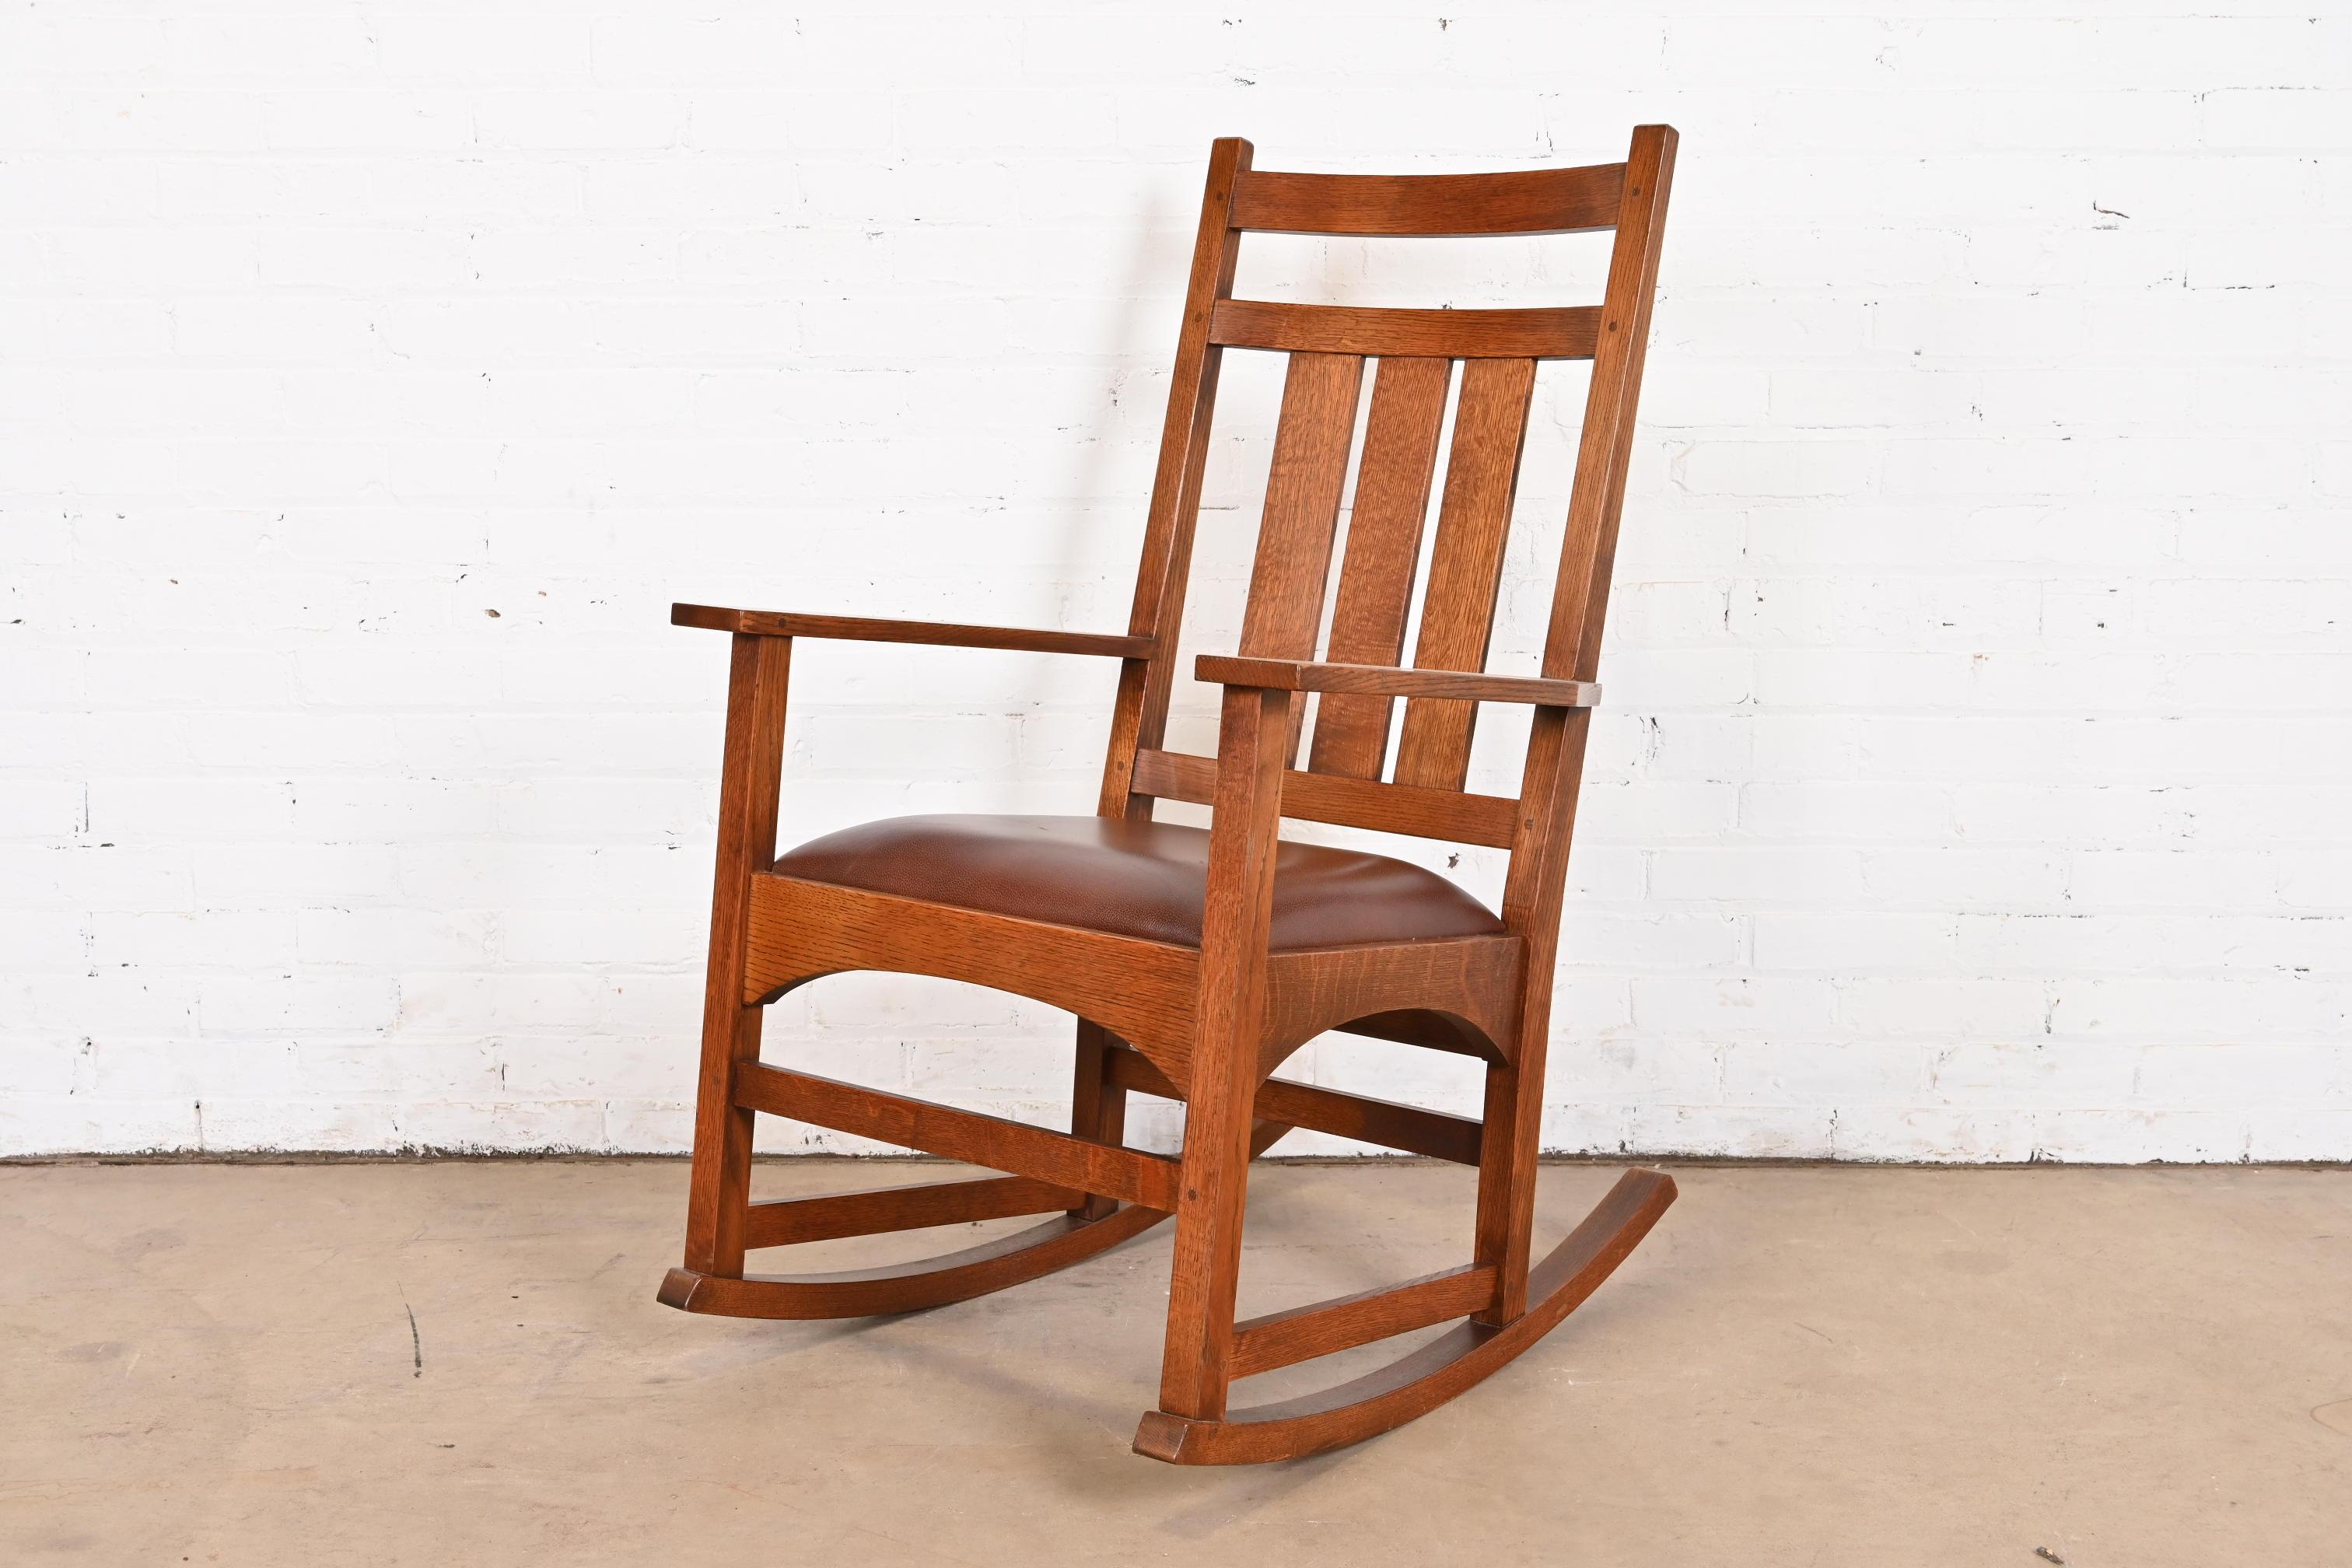 A gorgeous Mission or Arts & Crafts style rocking chair

By L. & J.G. Stickley, 